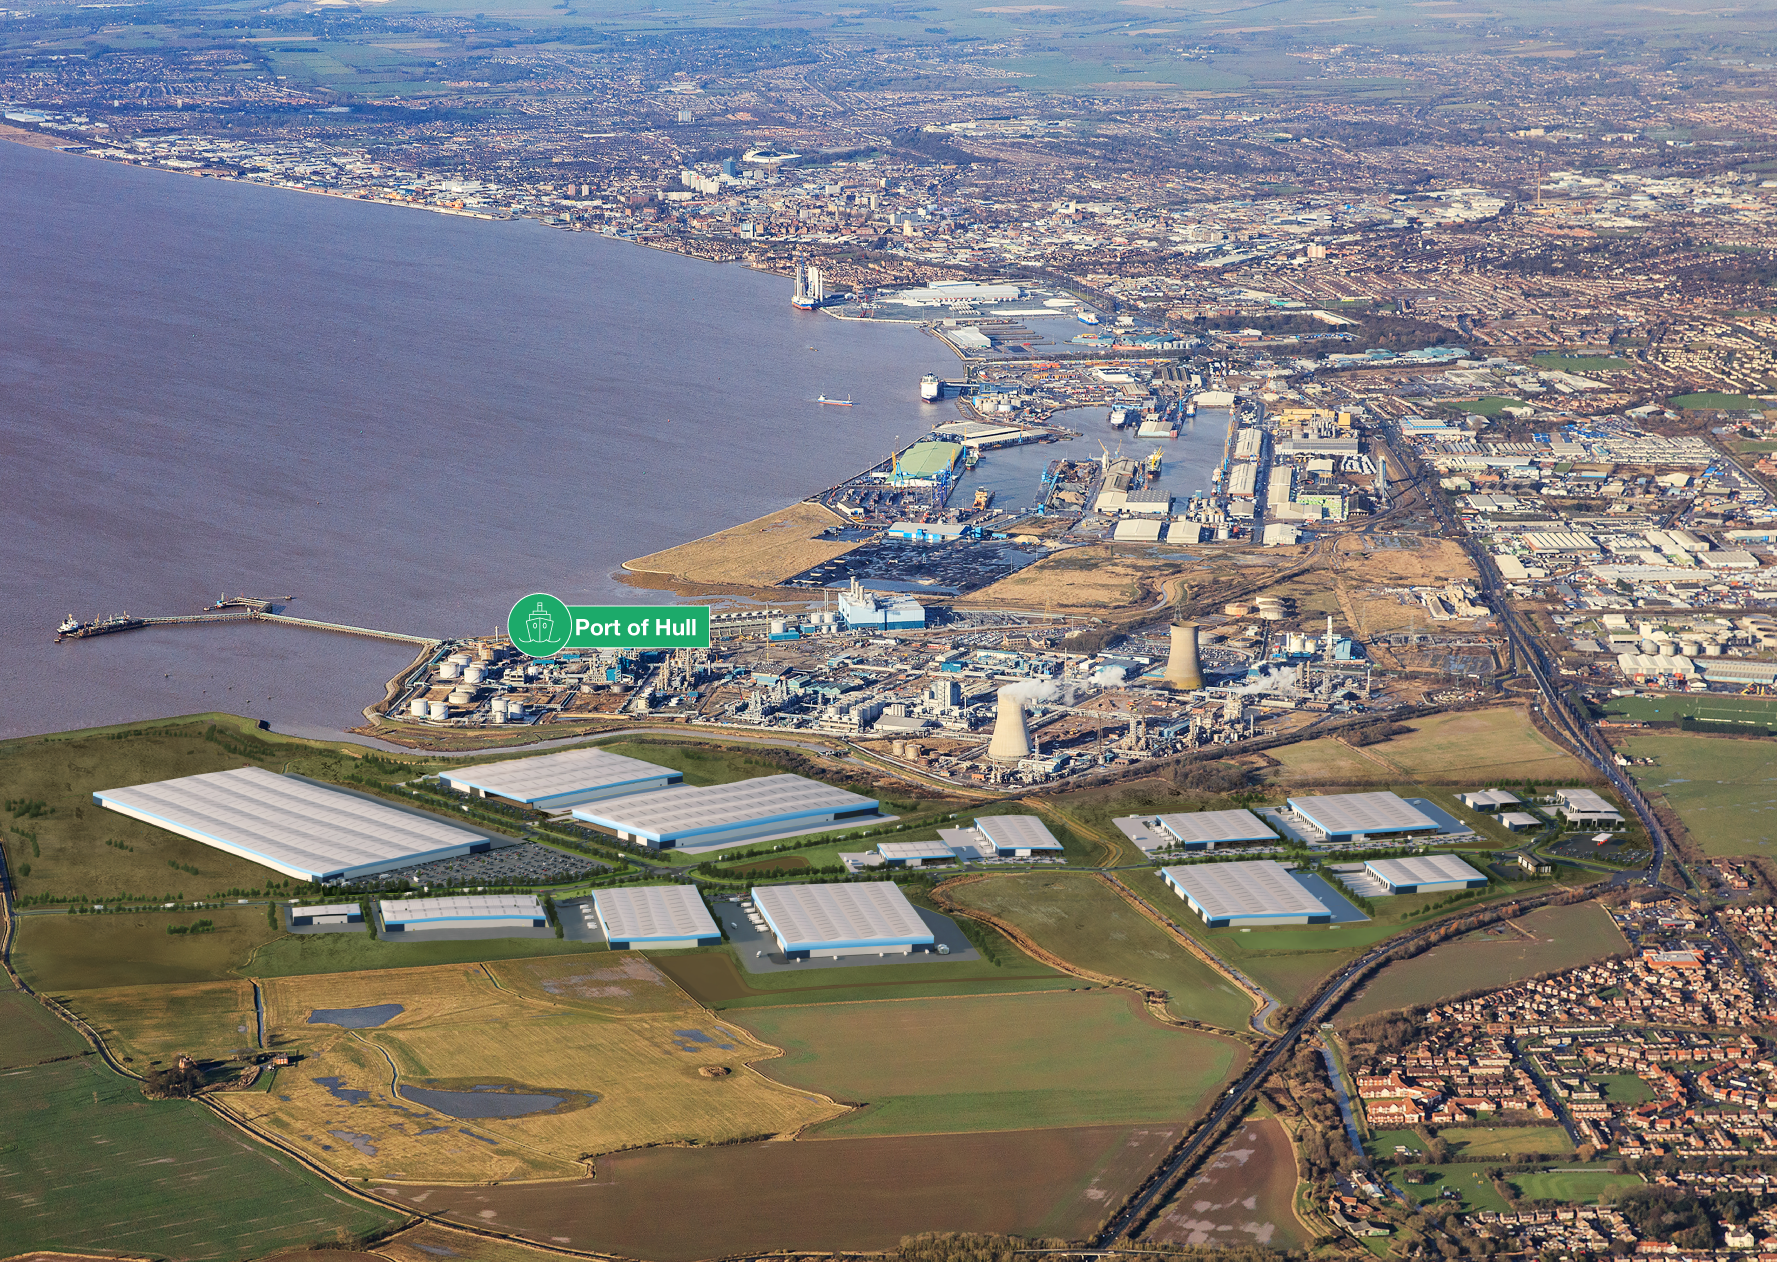 Land Development is a Key Factor For Growth In The Humber